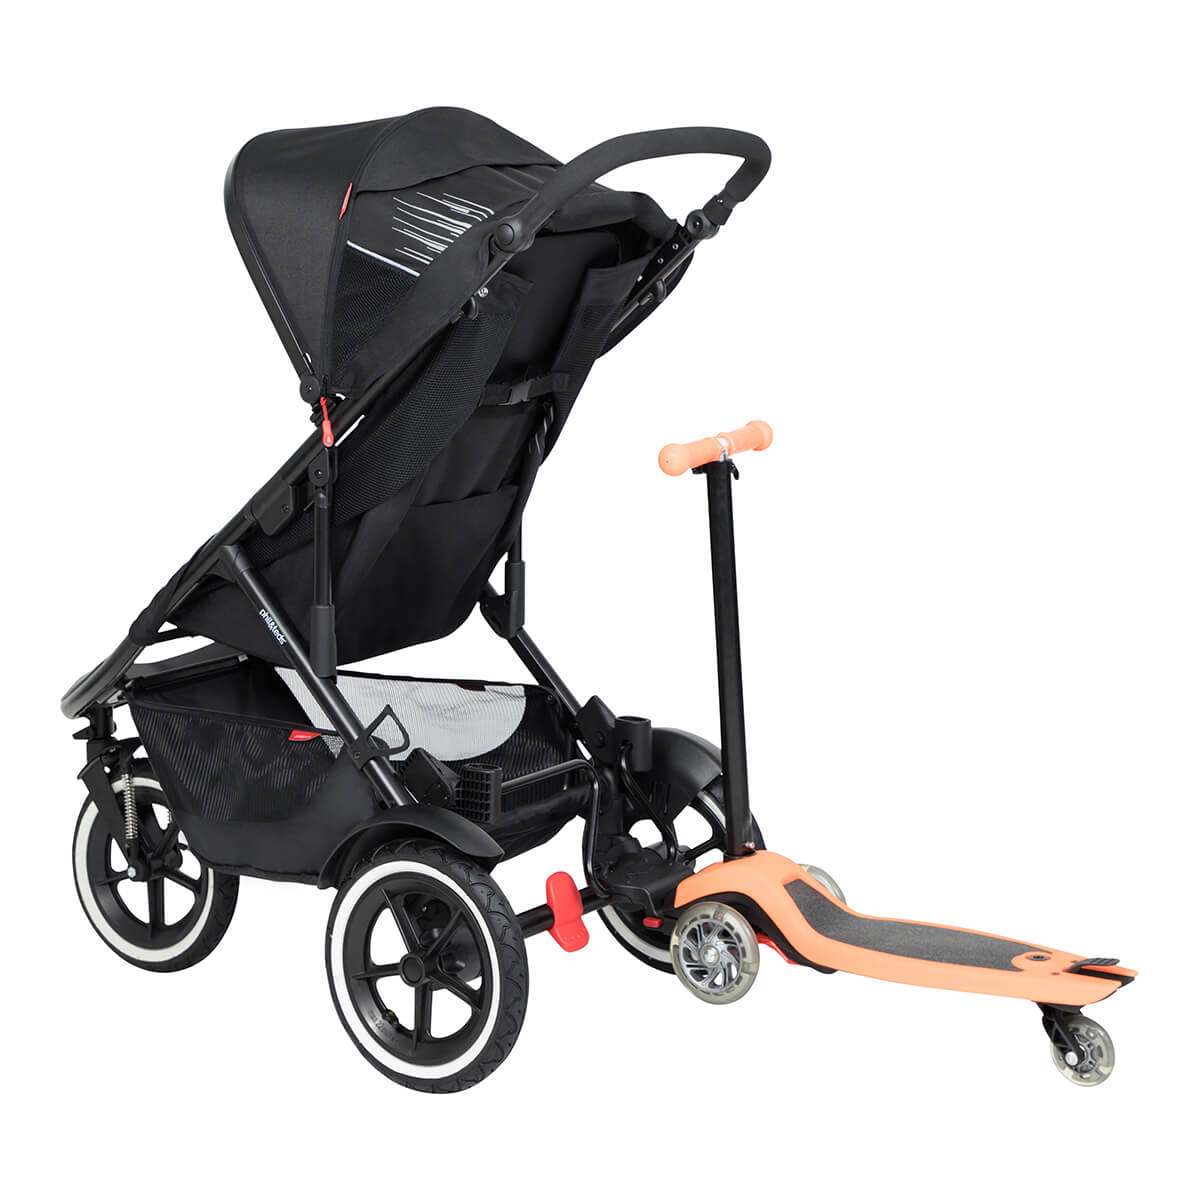 https://cdn.accentuate.io/4509527113816/19272668348504/philteds-sport-poussette-with-freerider-stroller-board-in-rear-v1626484326880.jpg?1200x1200